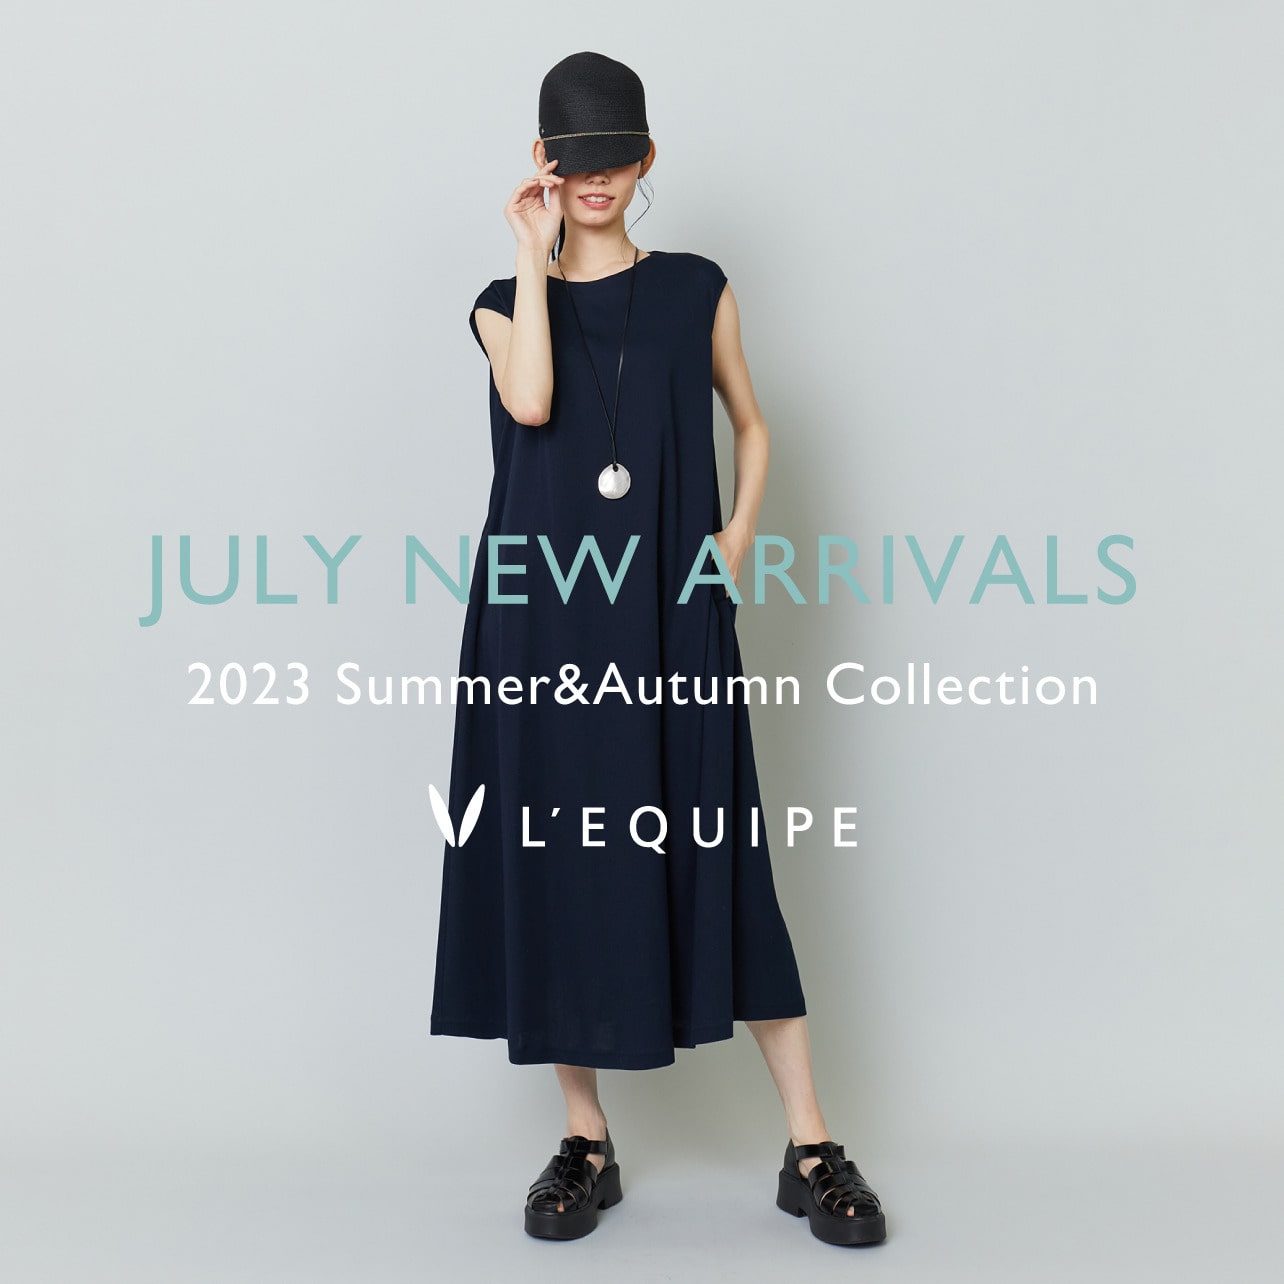 JULY NEW ARRIVALS